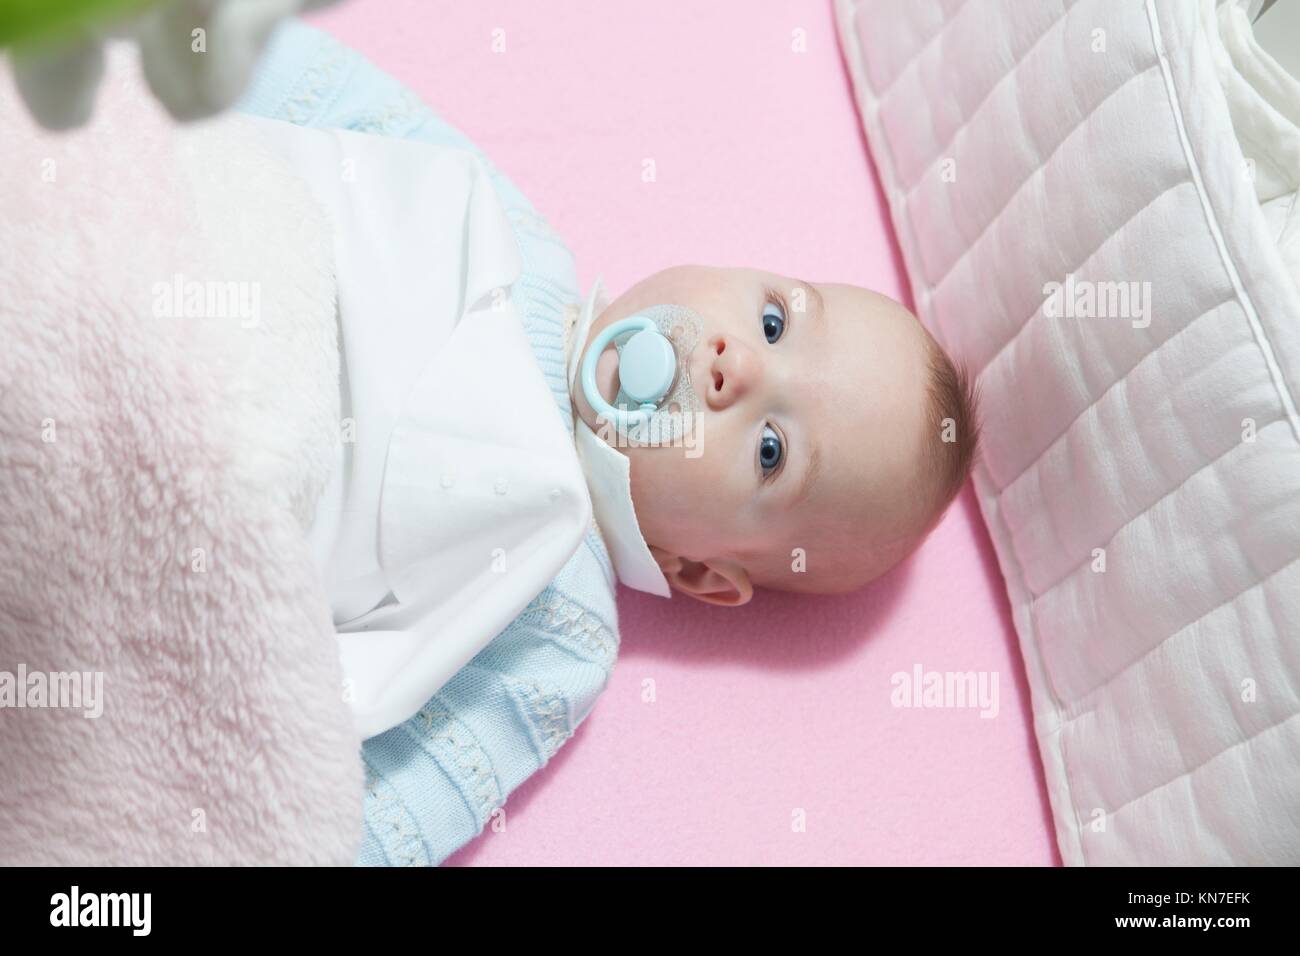 Awake four month baby boy lying in cot with bumper pad. Overhead view. Stock Photo